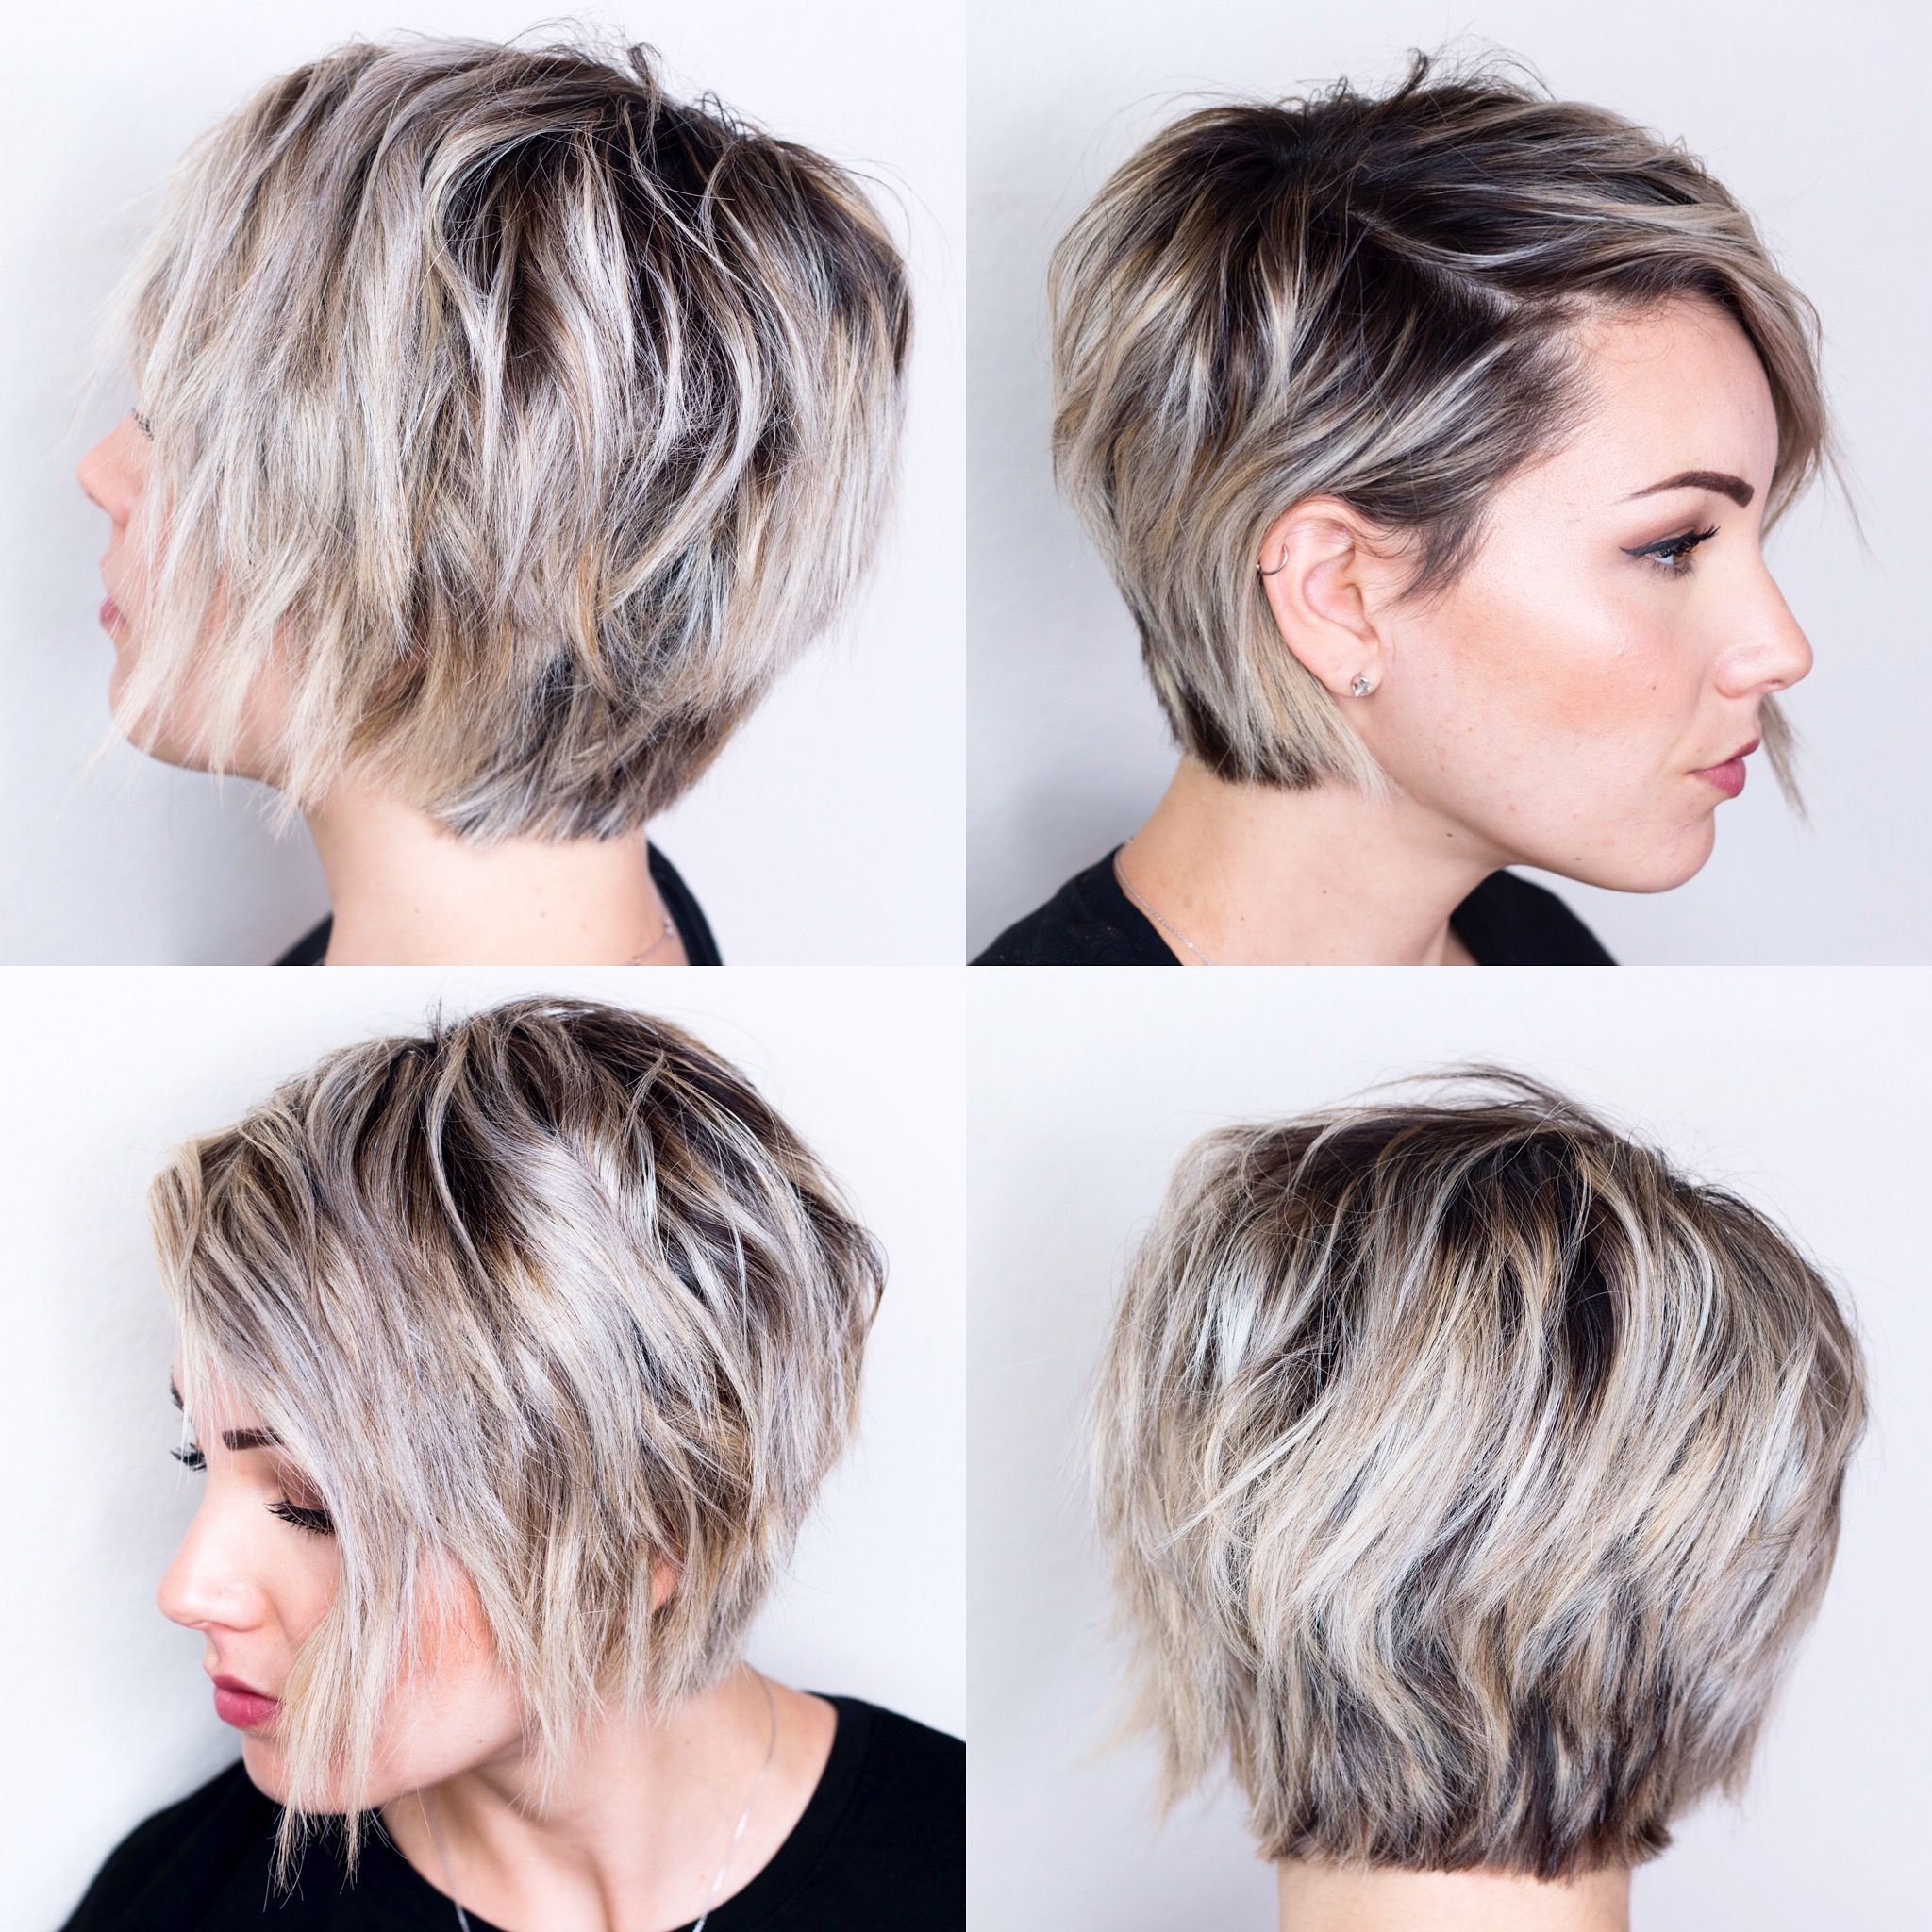 360 View Of Short Hair | H A I R In 2018 | Pinterest | Short Hair For Short Hairstyles For Women With Oval Face (Photo 2 of 25)